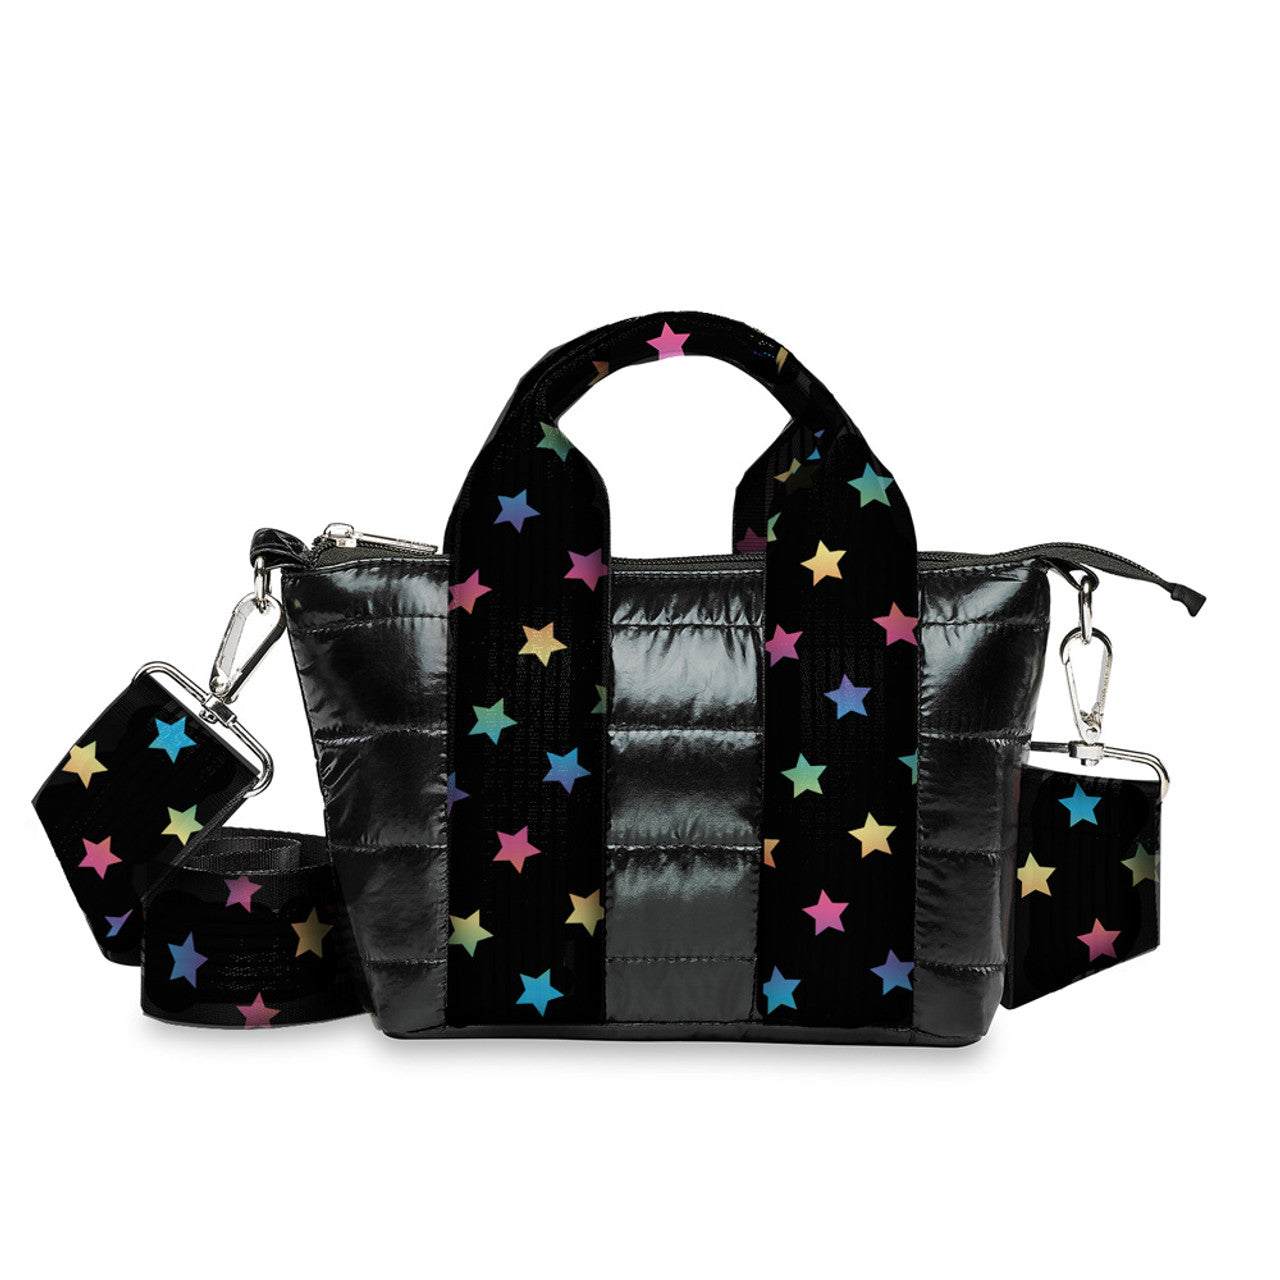 Girls Black Puffer Tiny Tote w/Scatter Star Straps